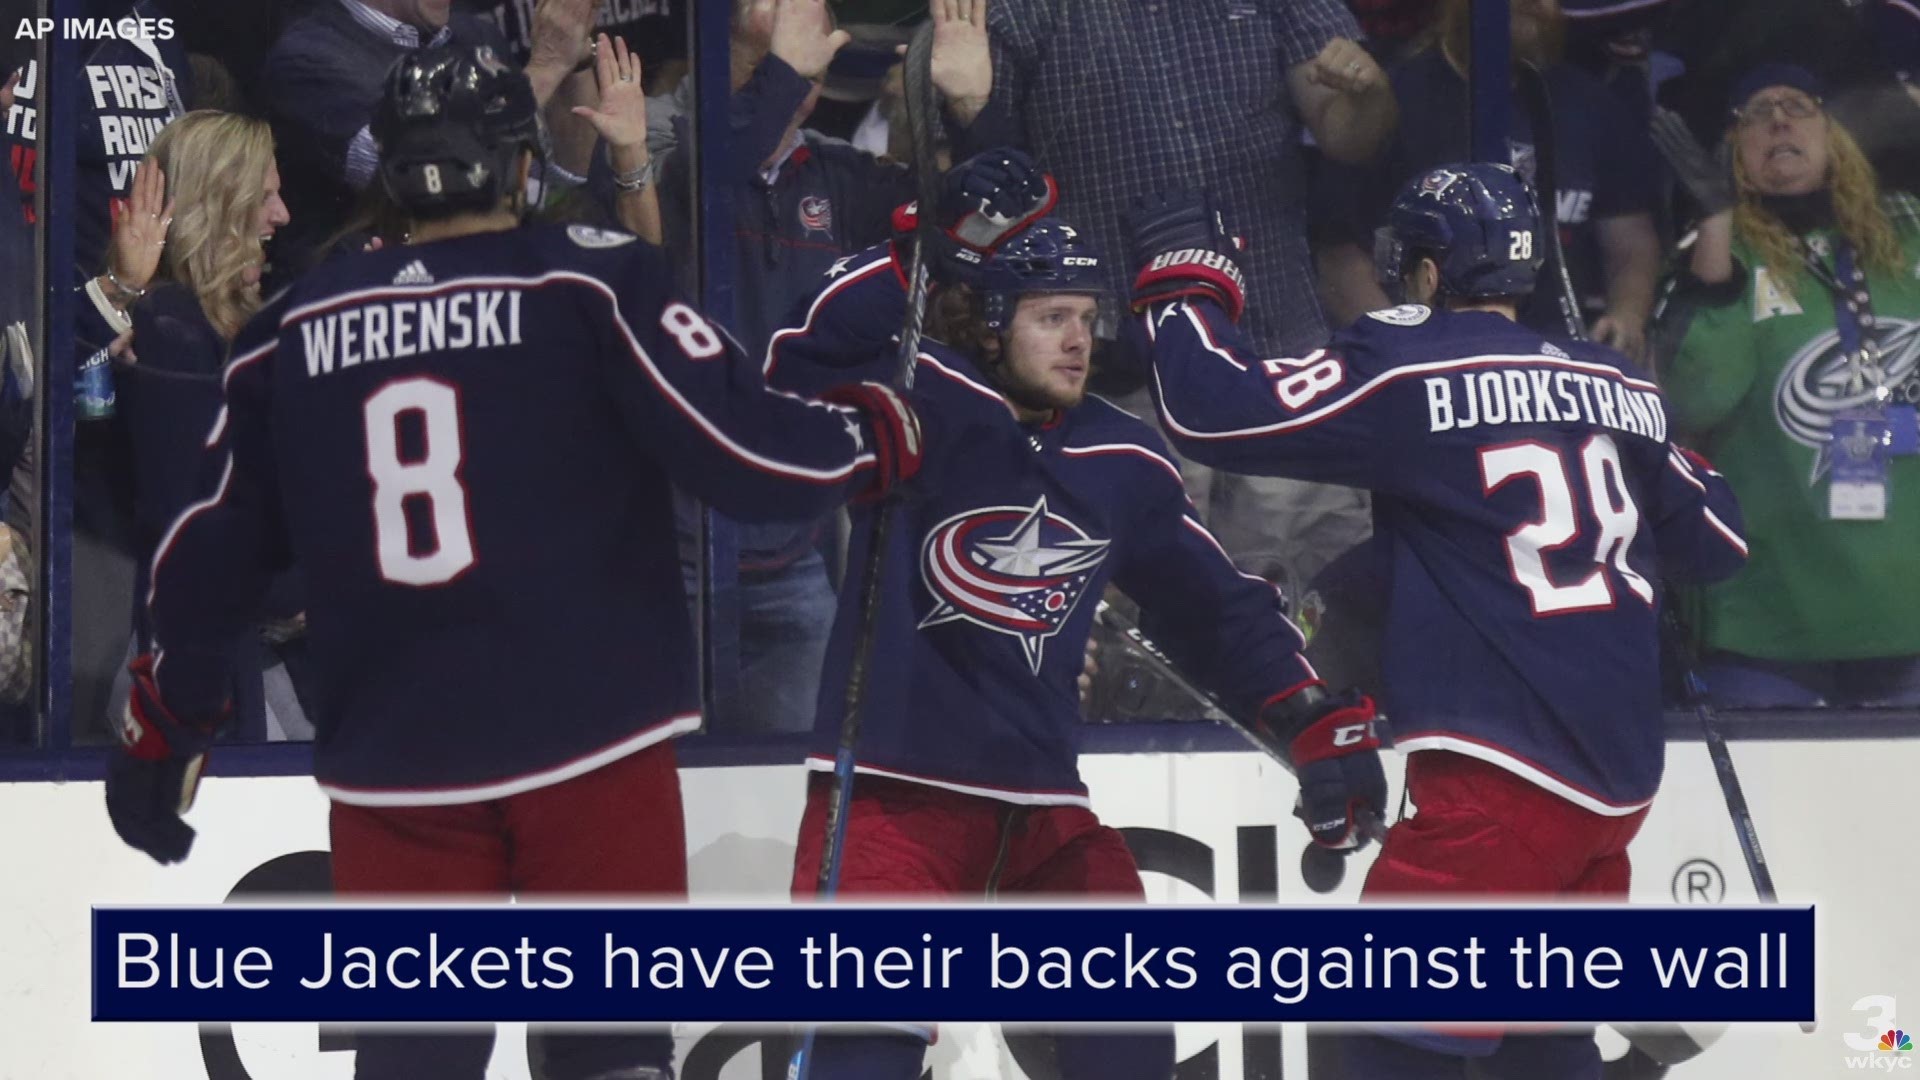 The Columbus Blue Jackets are facing elimination, but are embracing the opportunity to overcome adversity once